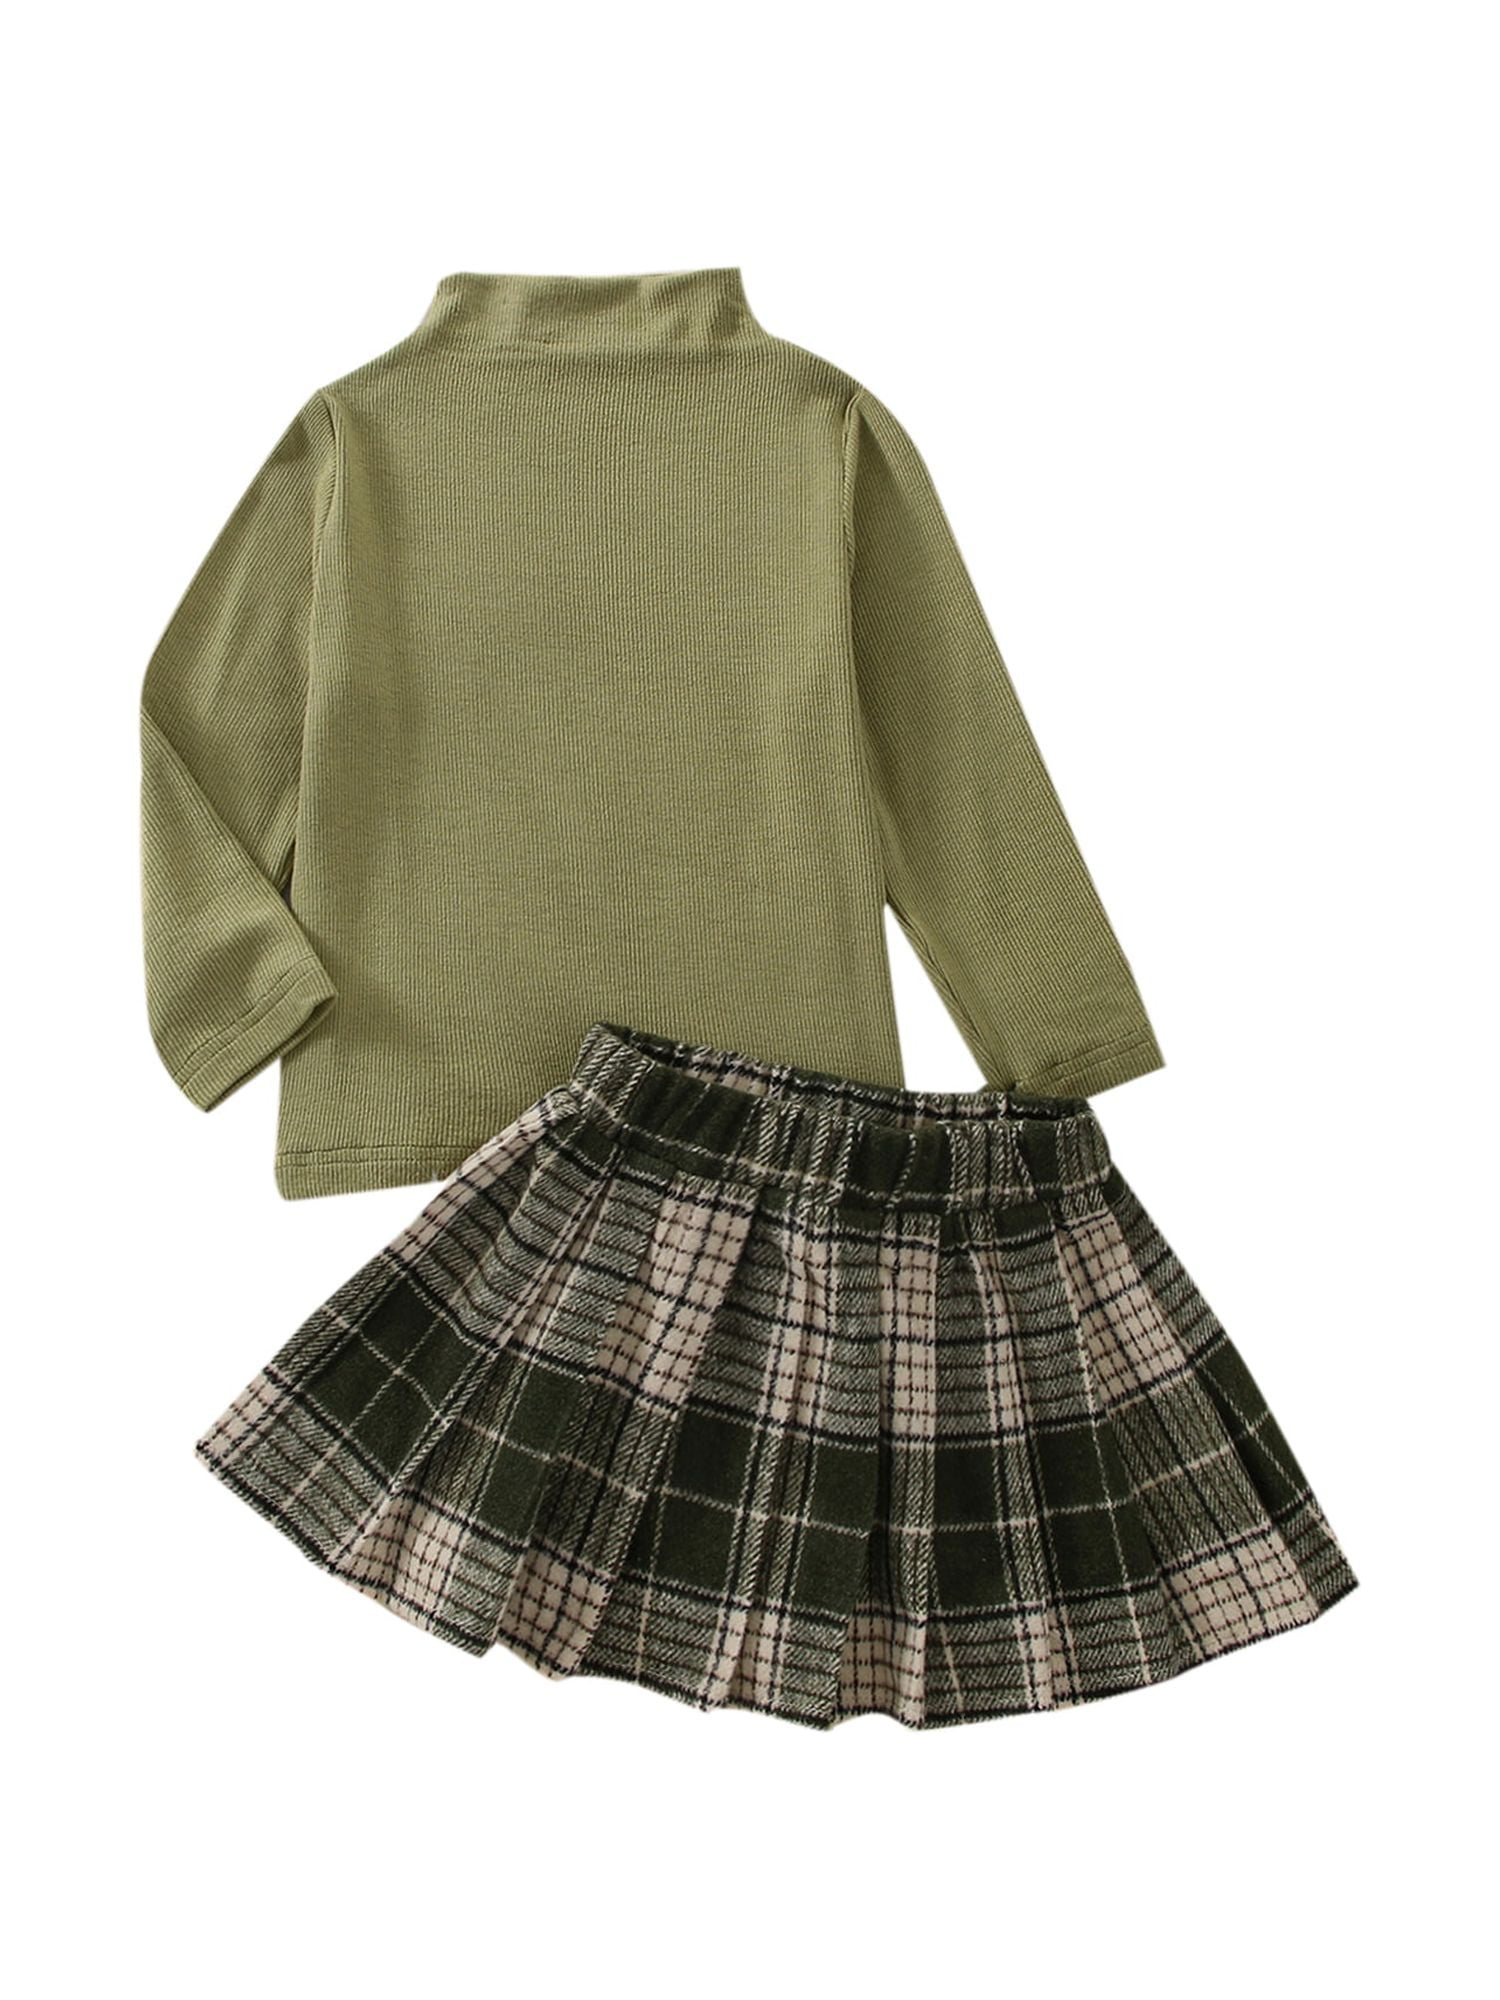 Gwiyeopda Toddler Girls Outfits Turtleneck Long Sleeve Knitted Tops + Preppy  Style Plaid Mini Pleated Skirt Cute Set 